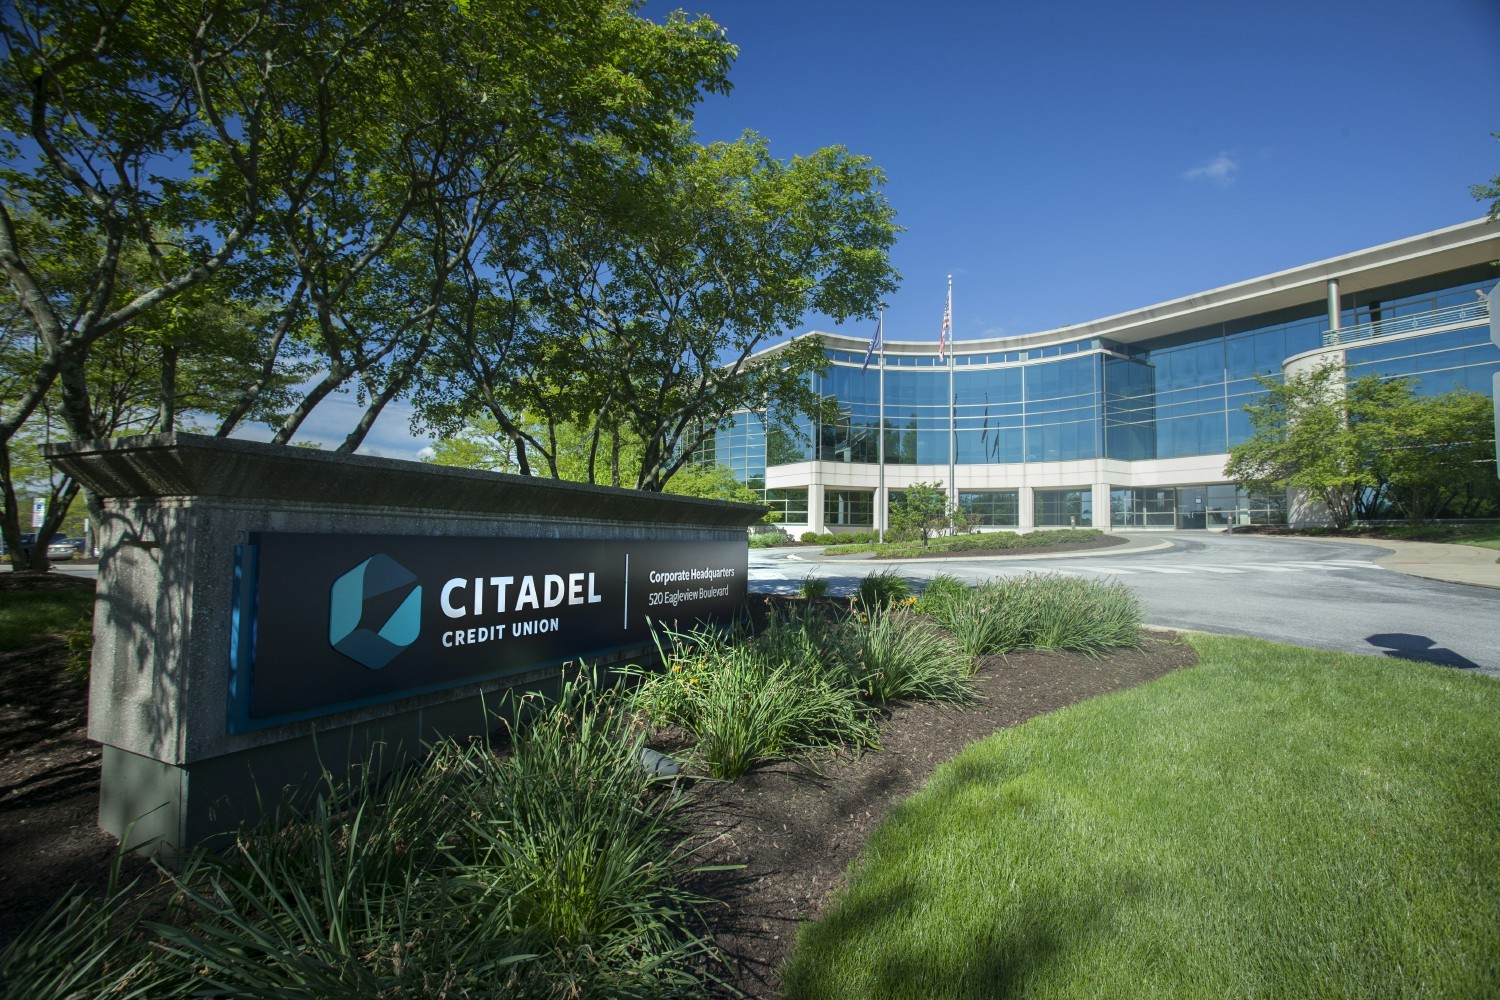 Welcome to Citadel's Corporate Headquarters located in Exton, Pennsylvania.